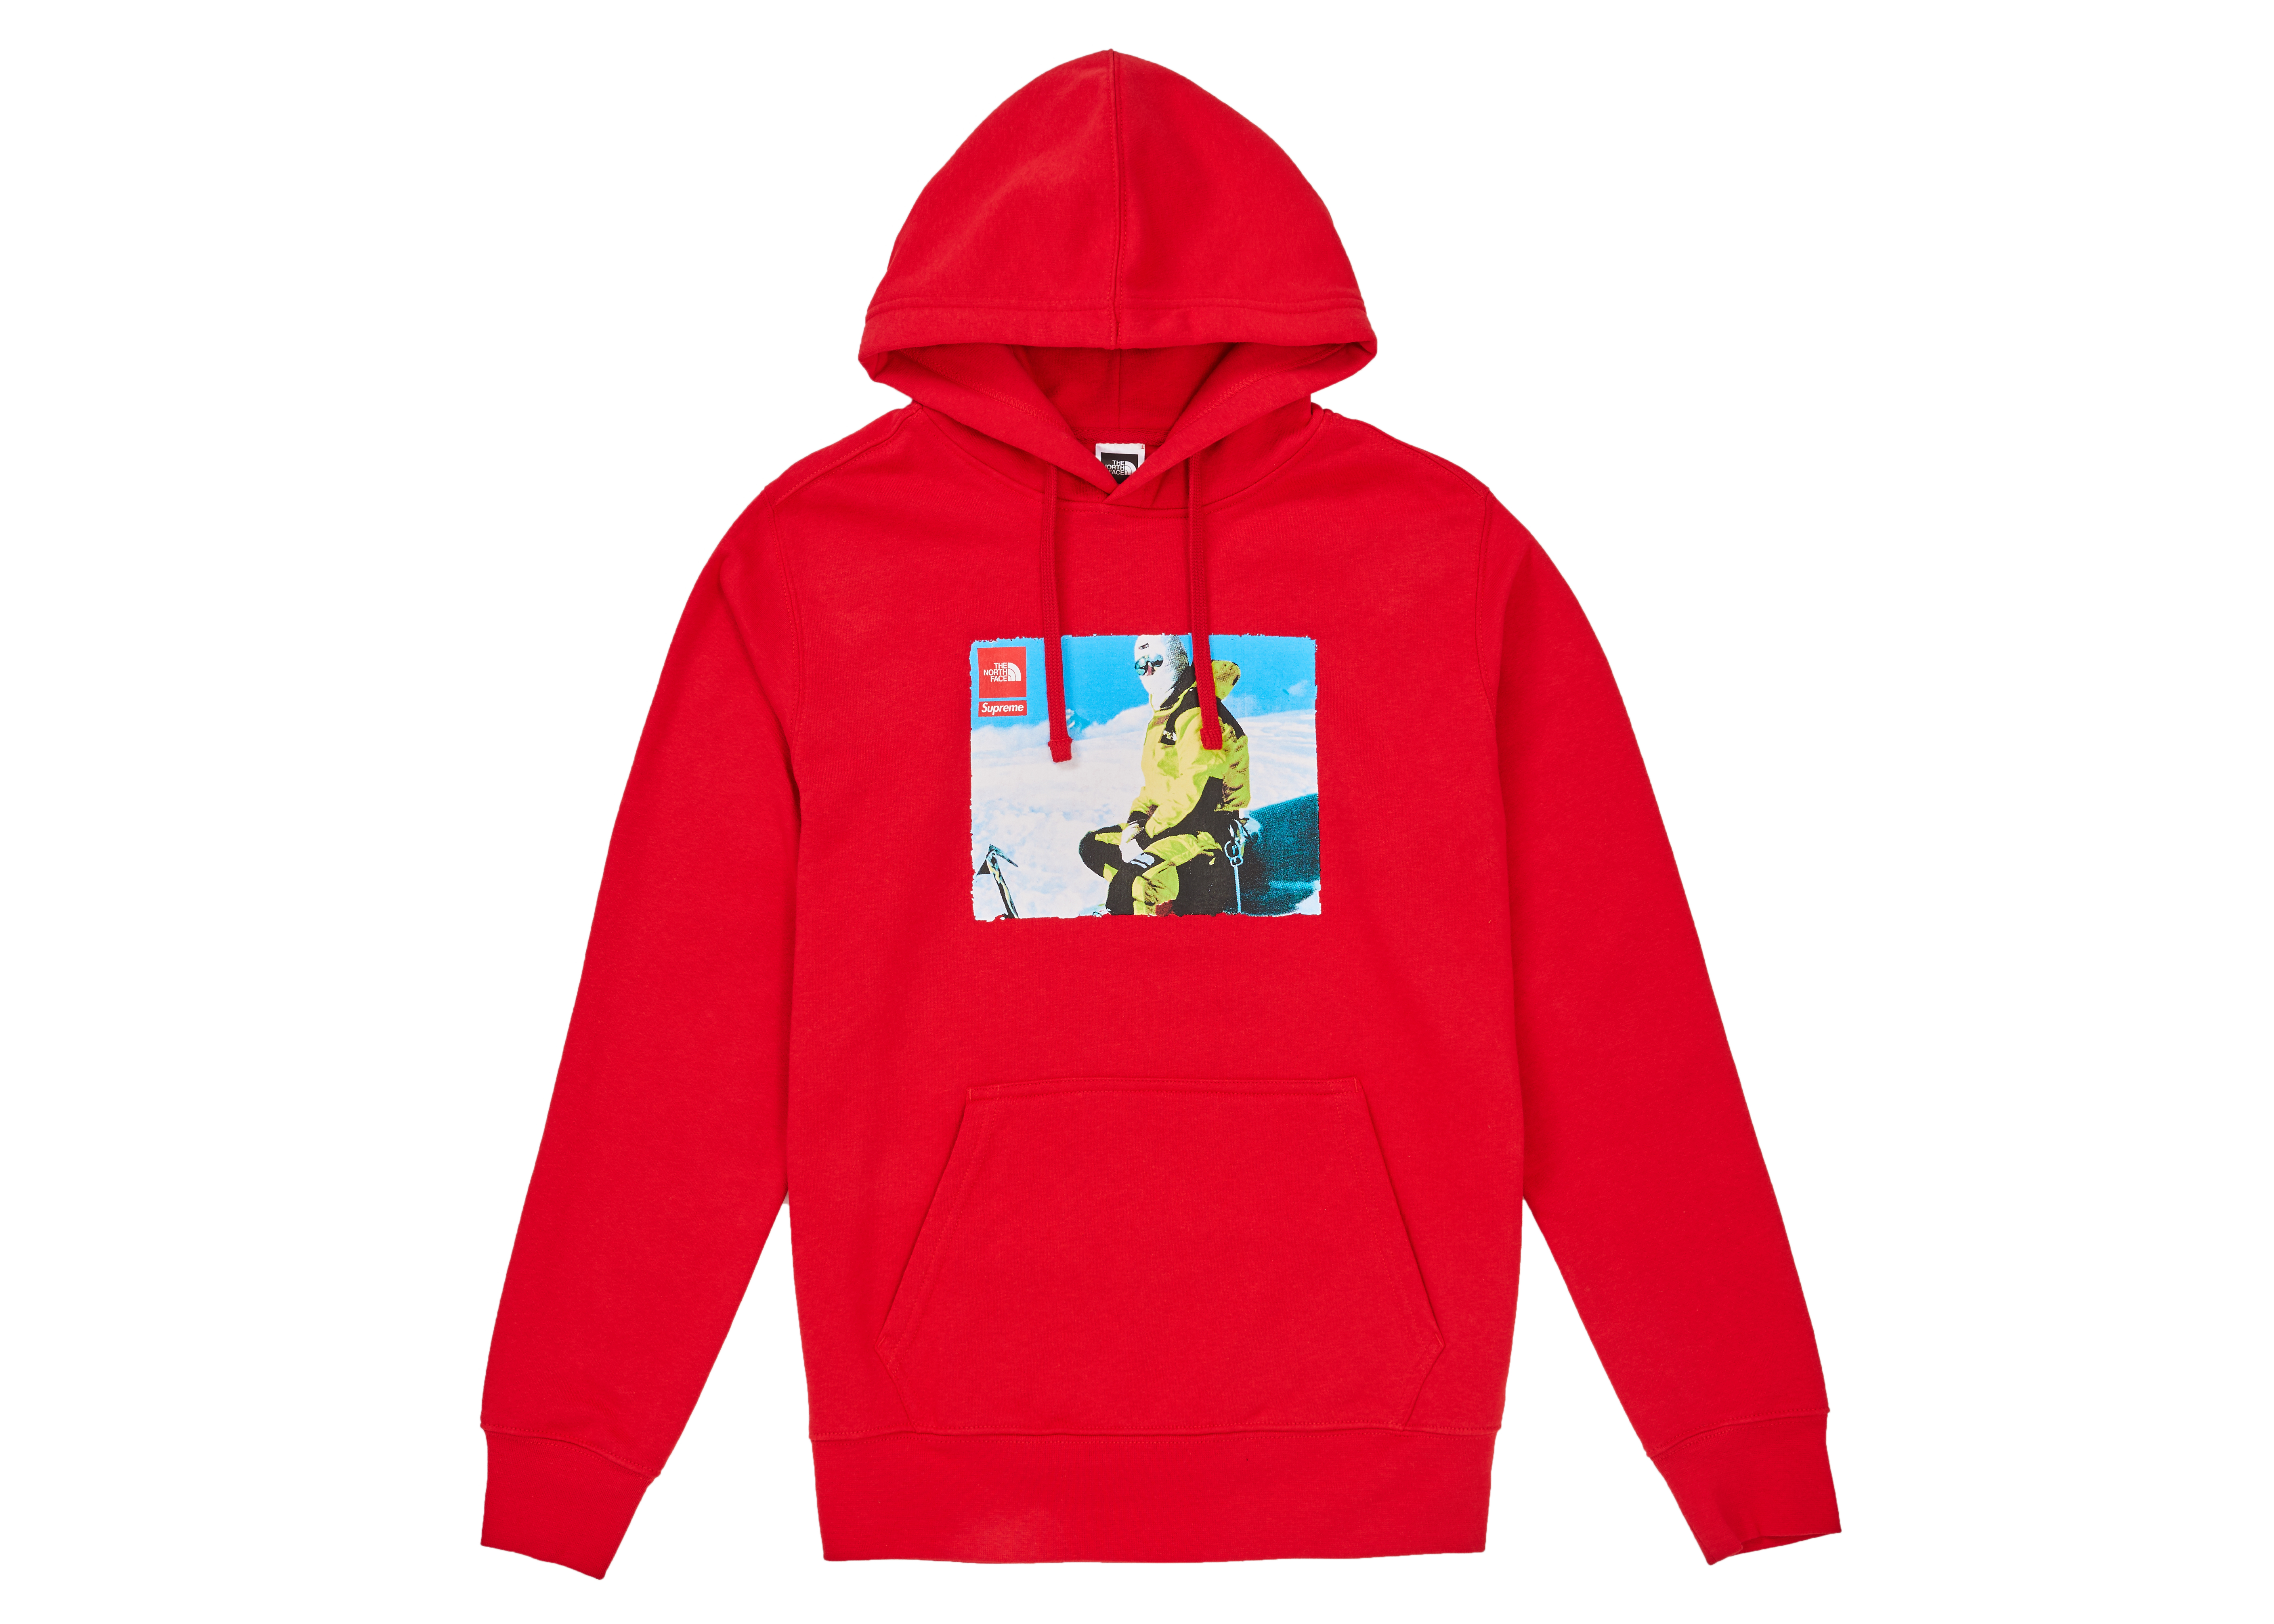 Supreme The North Face Photo Hooded Sweatshirt Red